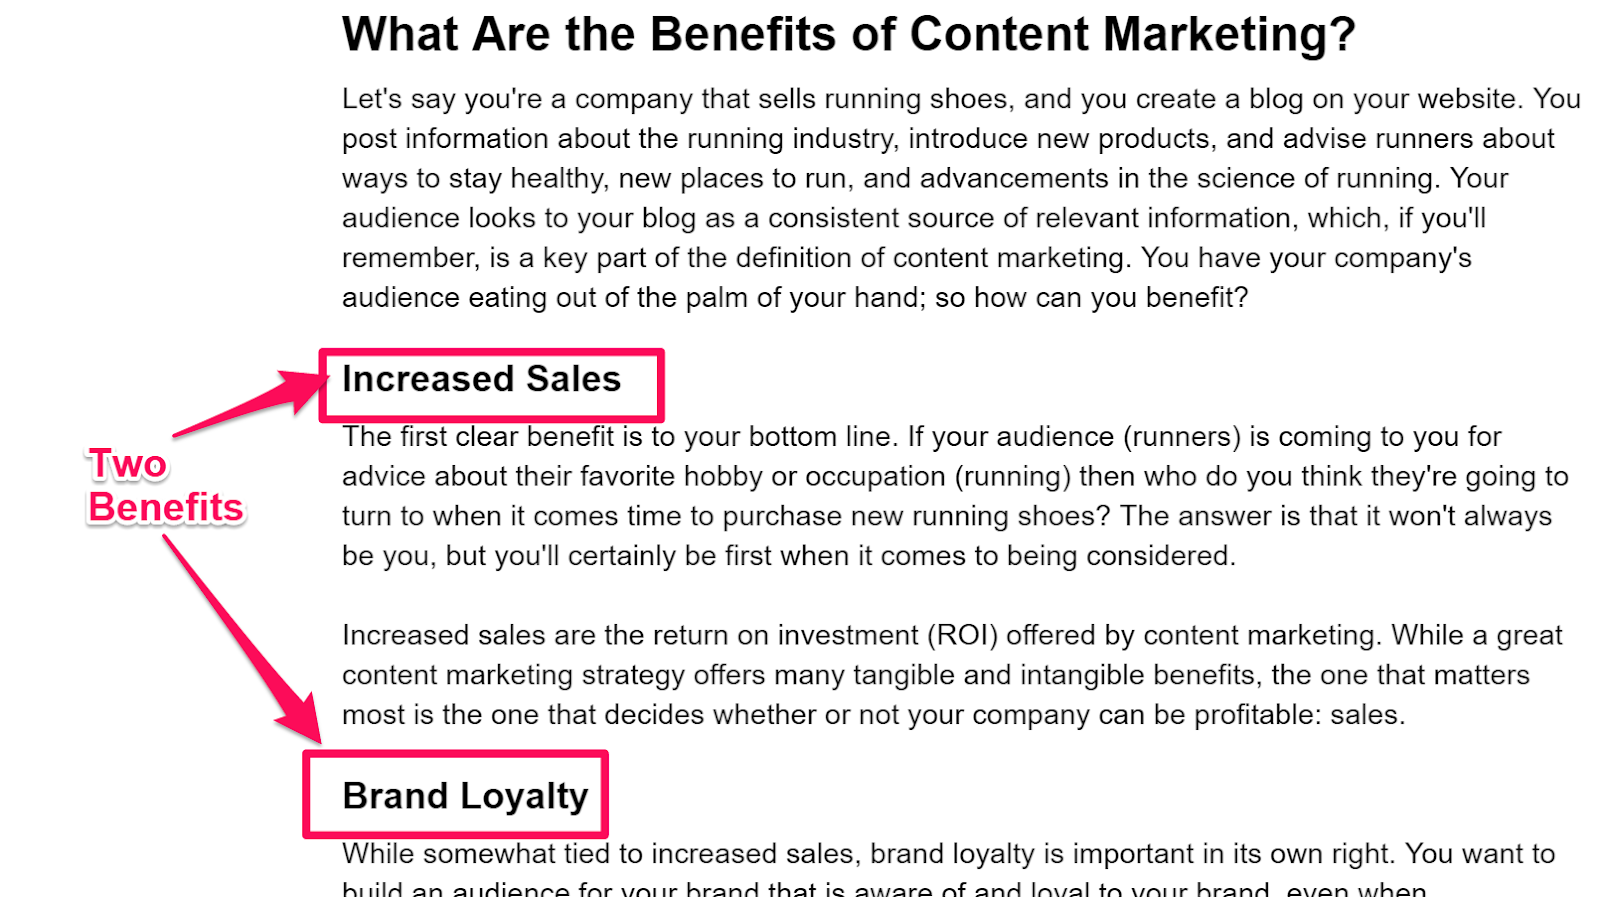 benefits of content marketing (crowd content)